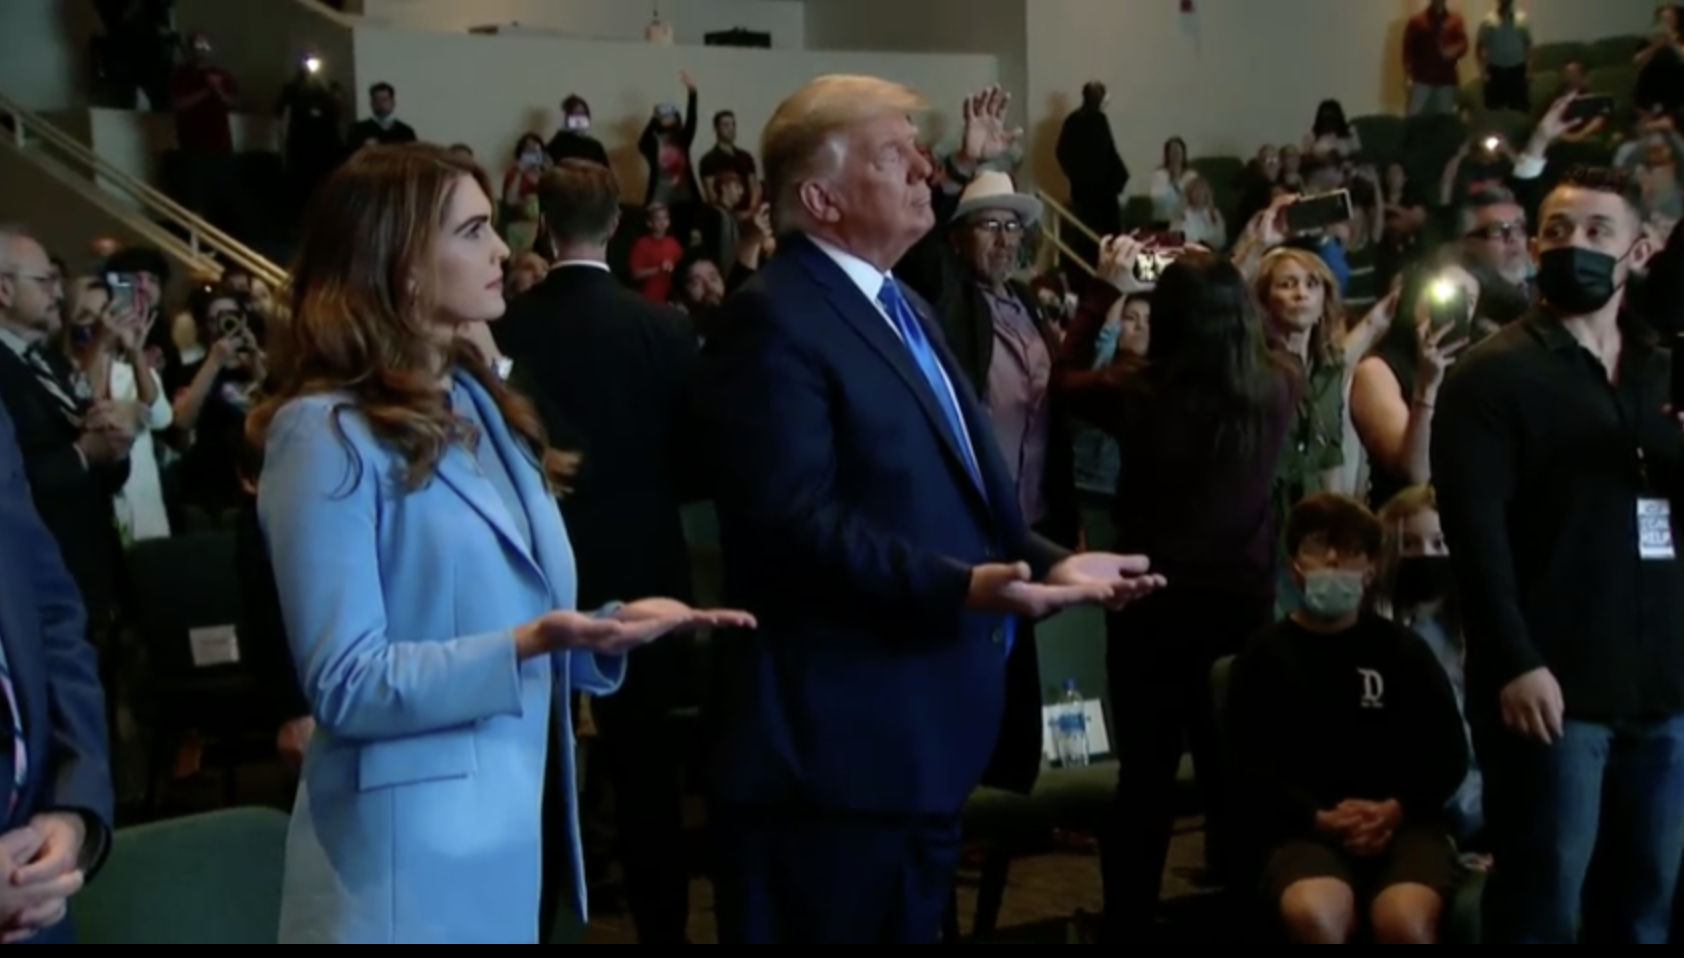 There are some masks and social distances in the church service that Trump attended